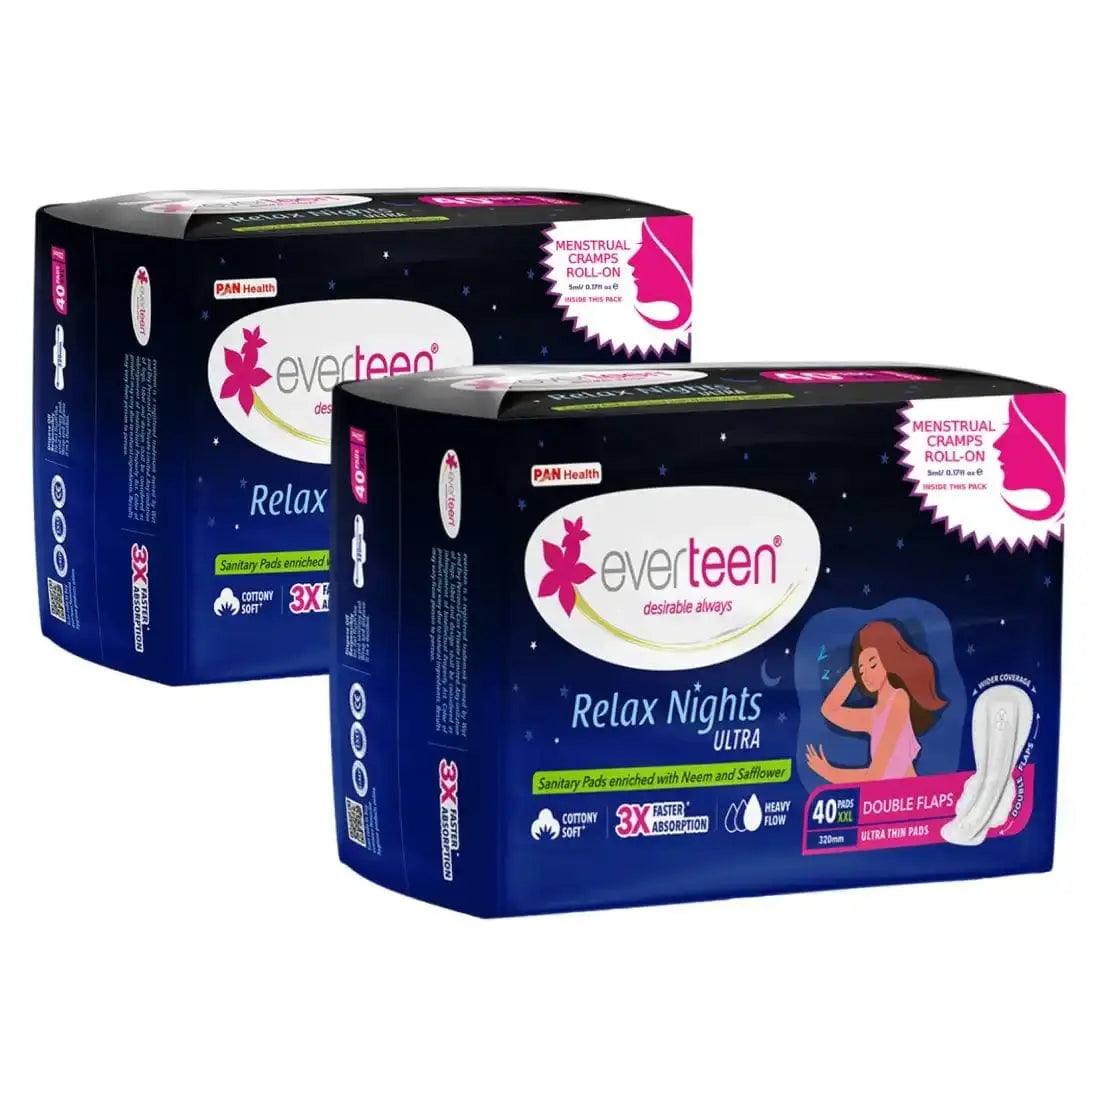 everteen XXL Relax Nights Ultra Thin 40 Sanitary Pads with Neem and Safflower, Menstrual Cramps Roll-On Inside Pack 7419870438494